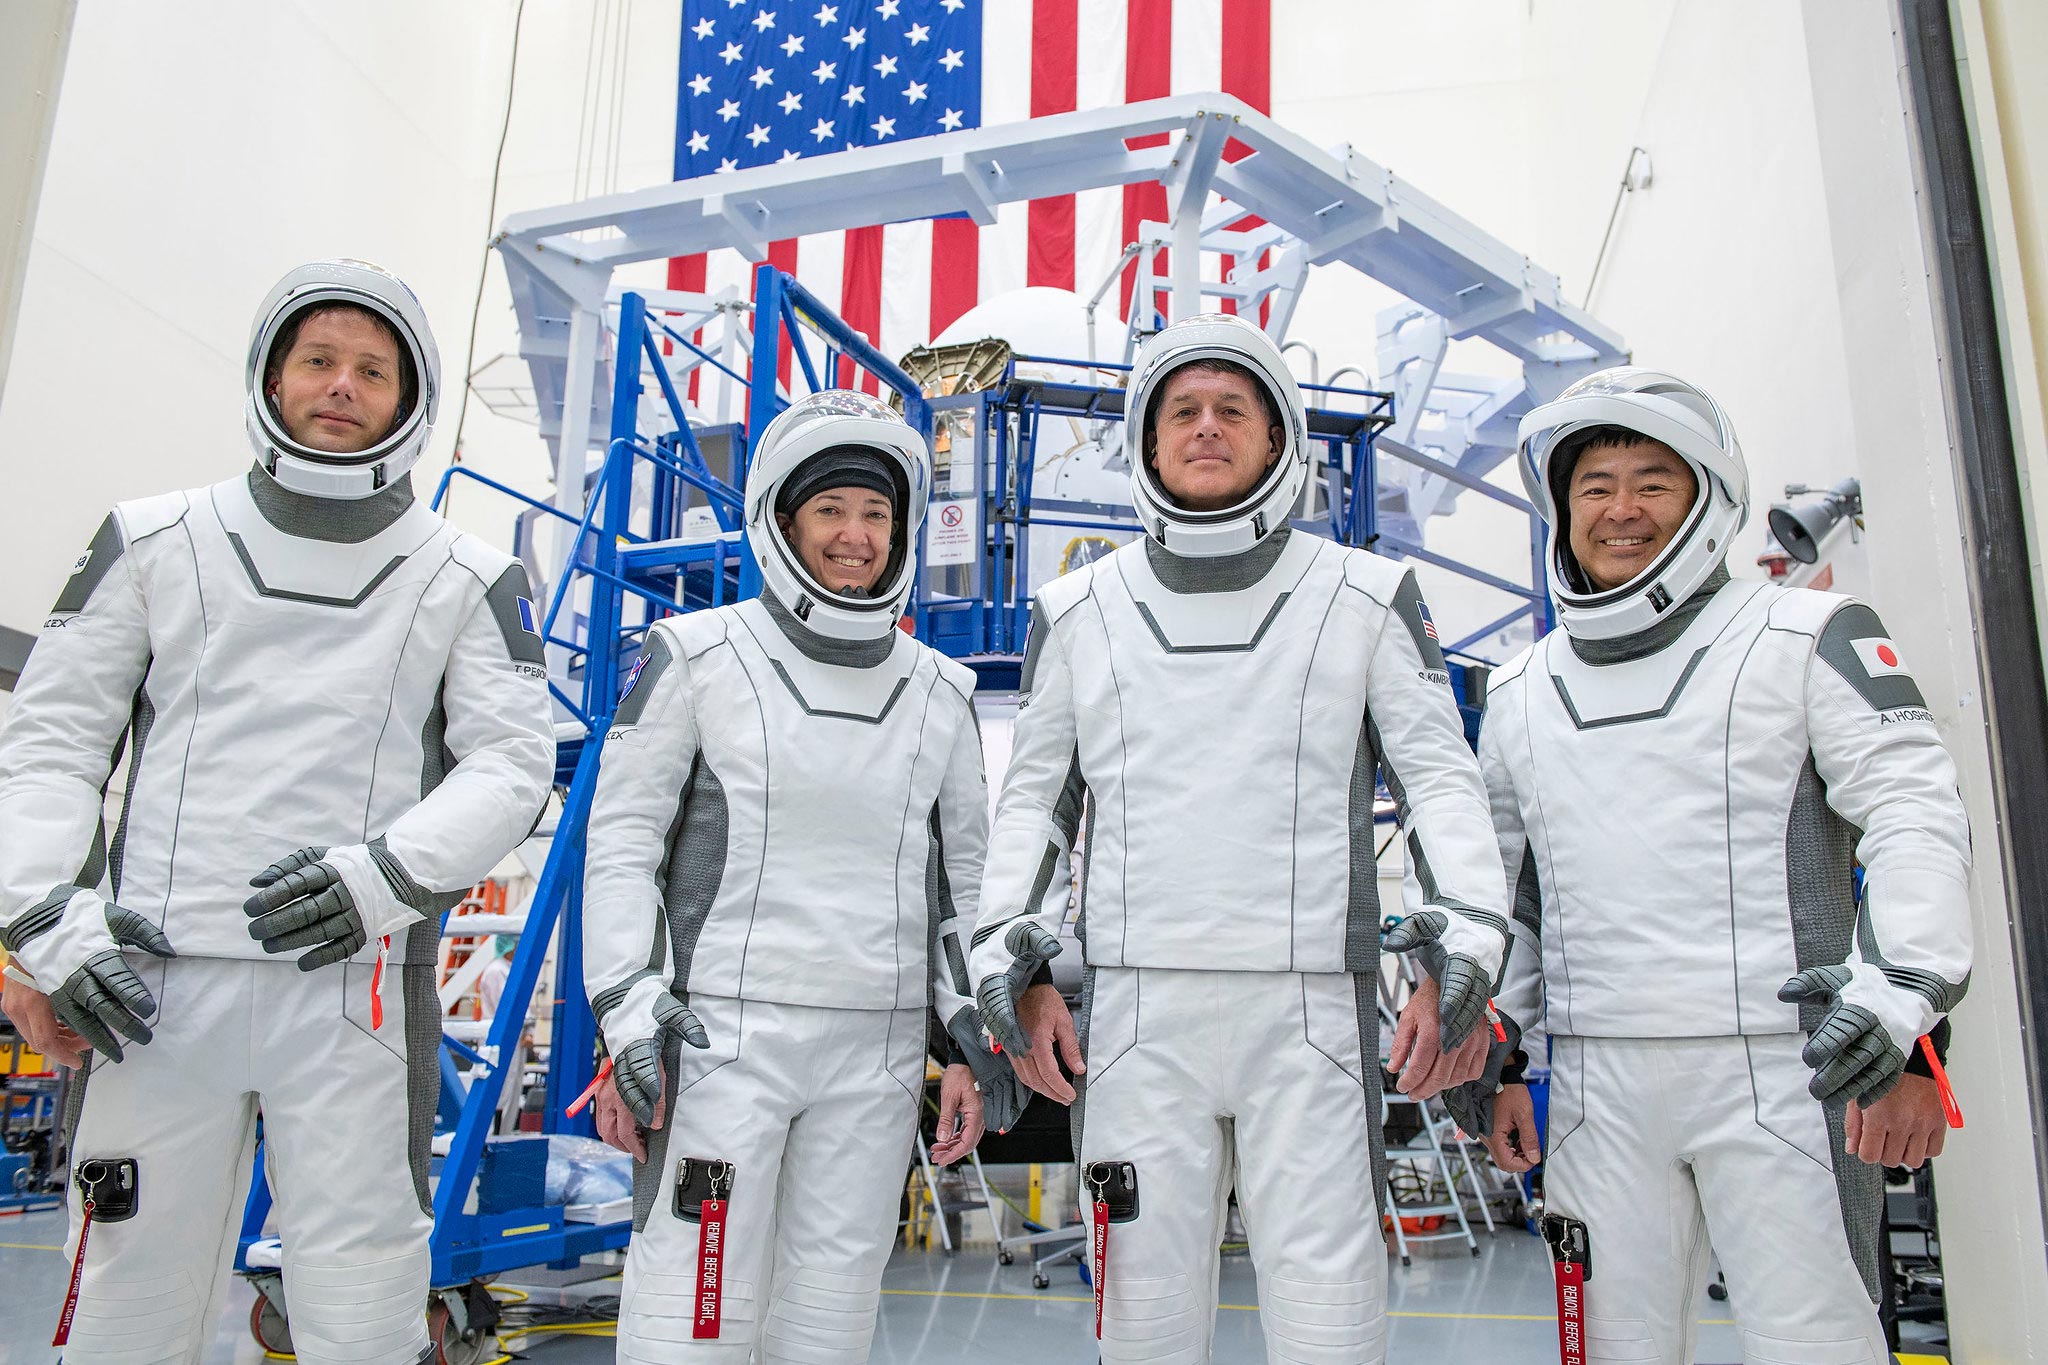 NASA SpaceX Crew-2 Astronauts leave for space station to perform microgravity science